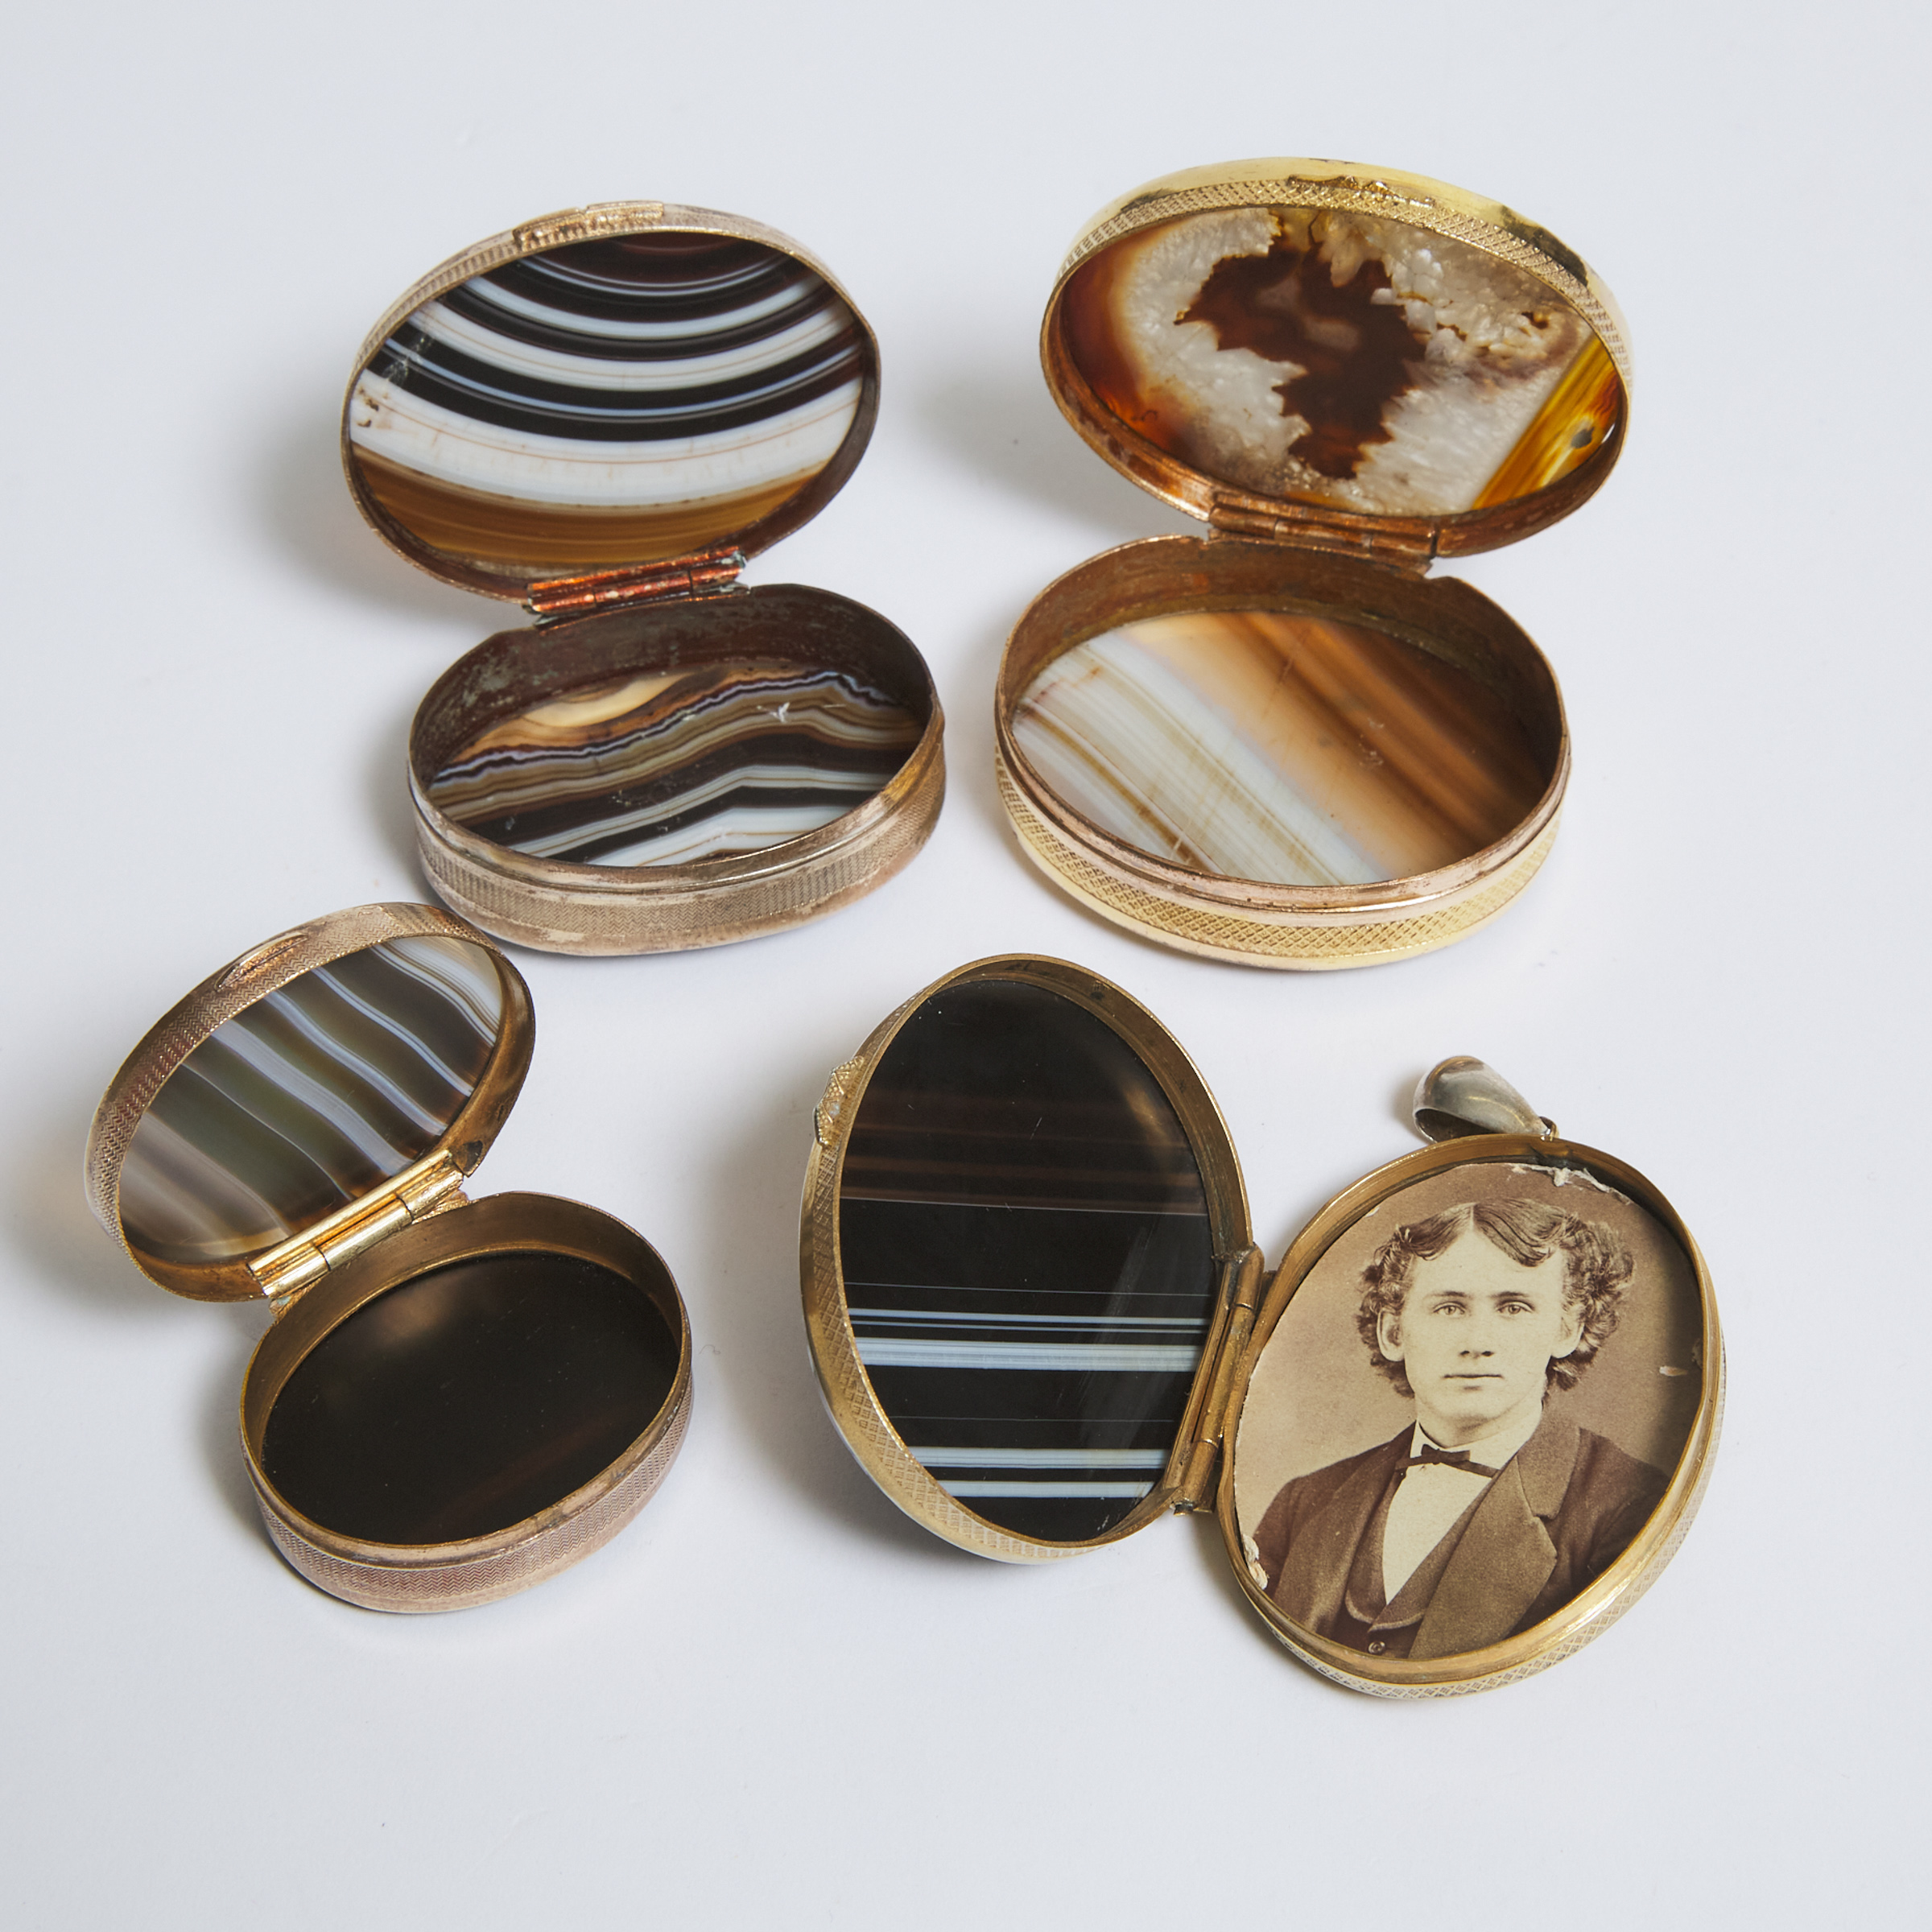 Three Italian Oval Agate Mounted Gilt Metal Dresser Boxes and a Locket Pendant, early 20th century